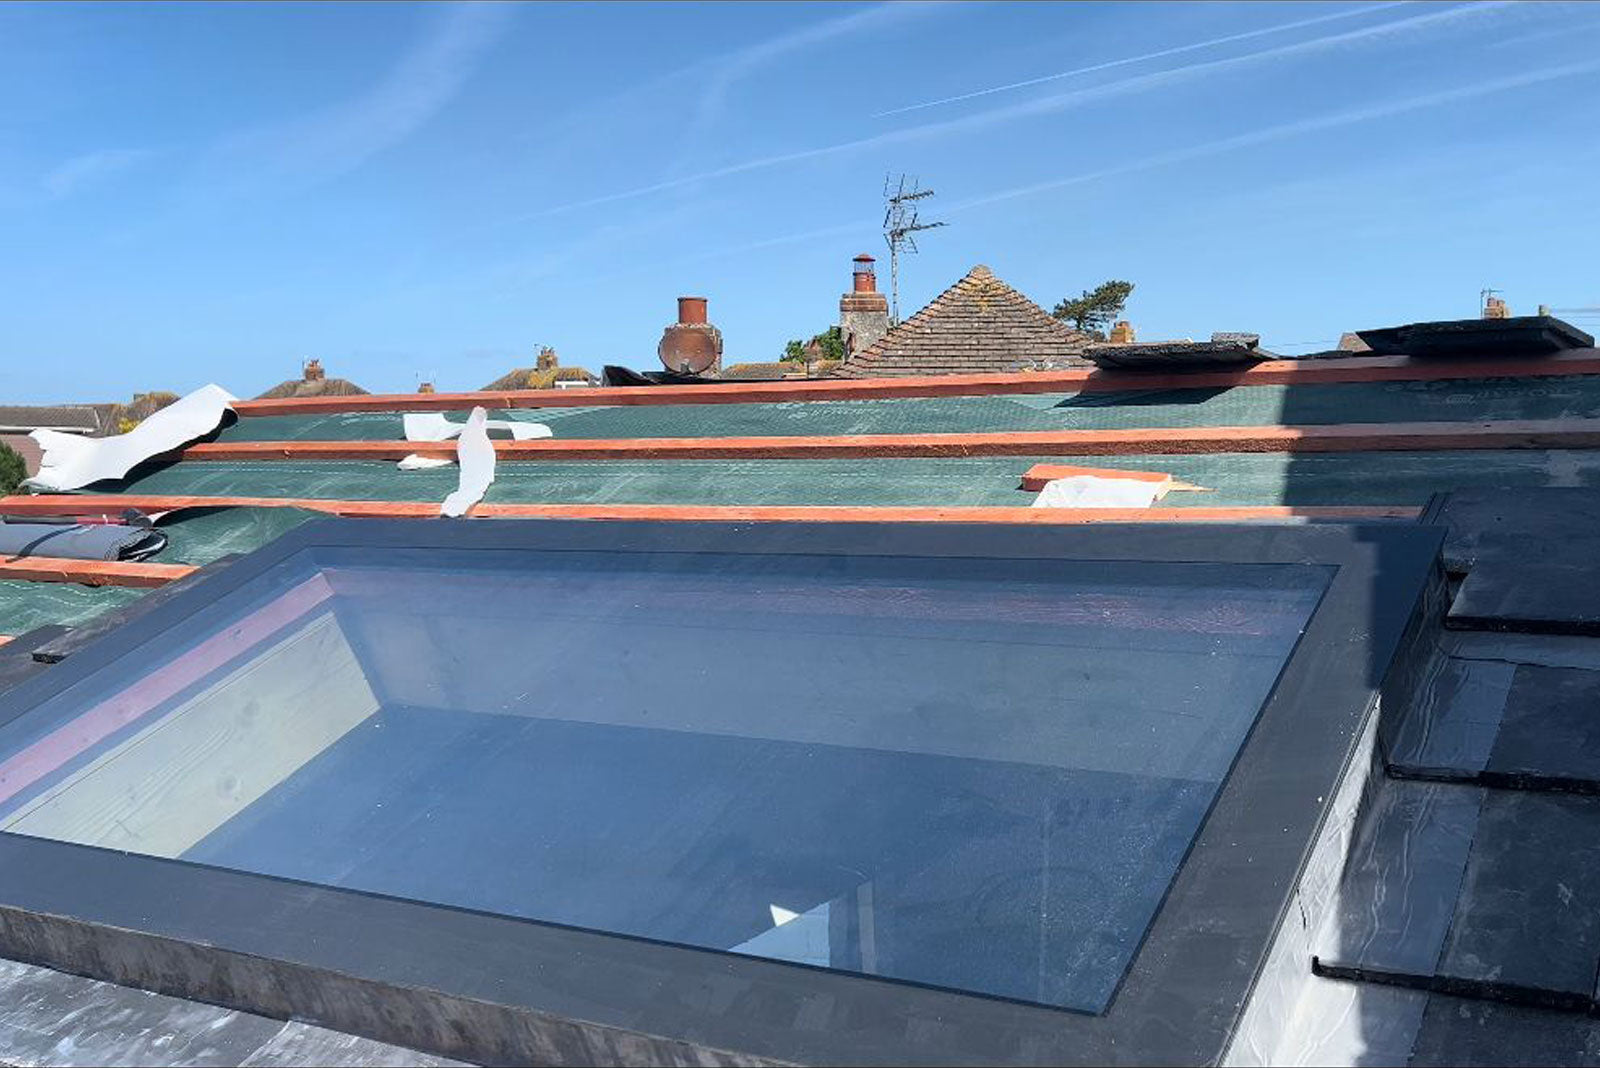 Pitched Roof Skylight 800 x 800mm